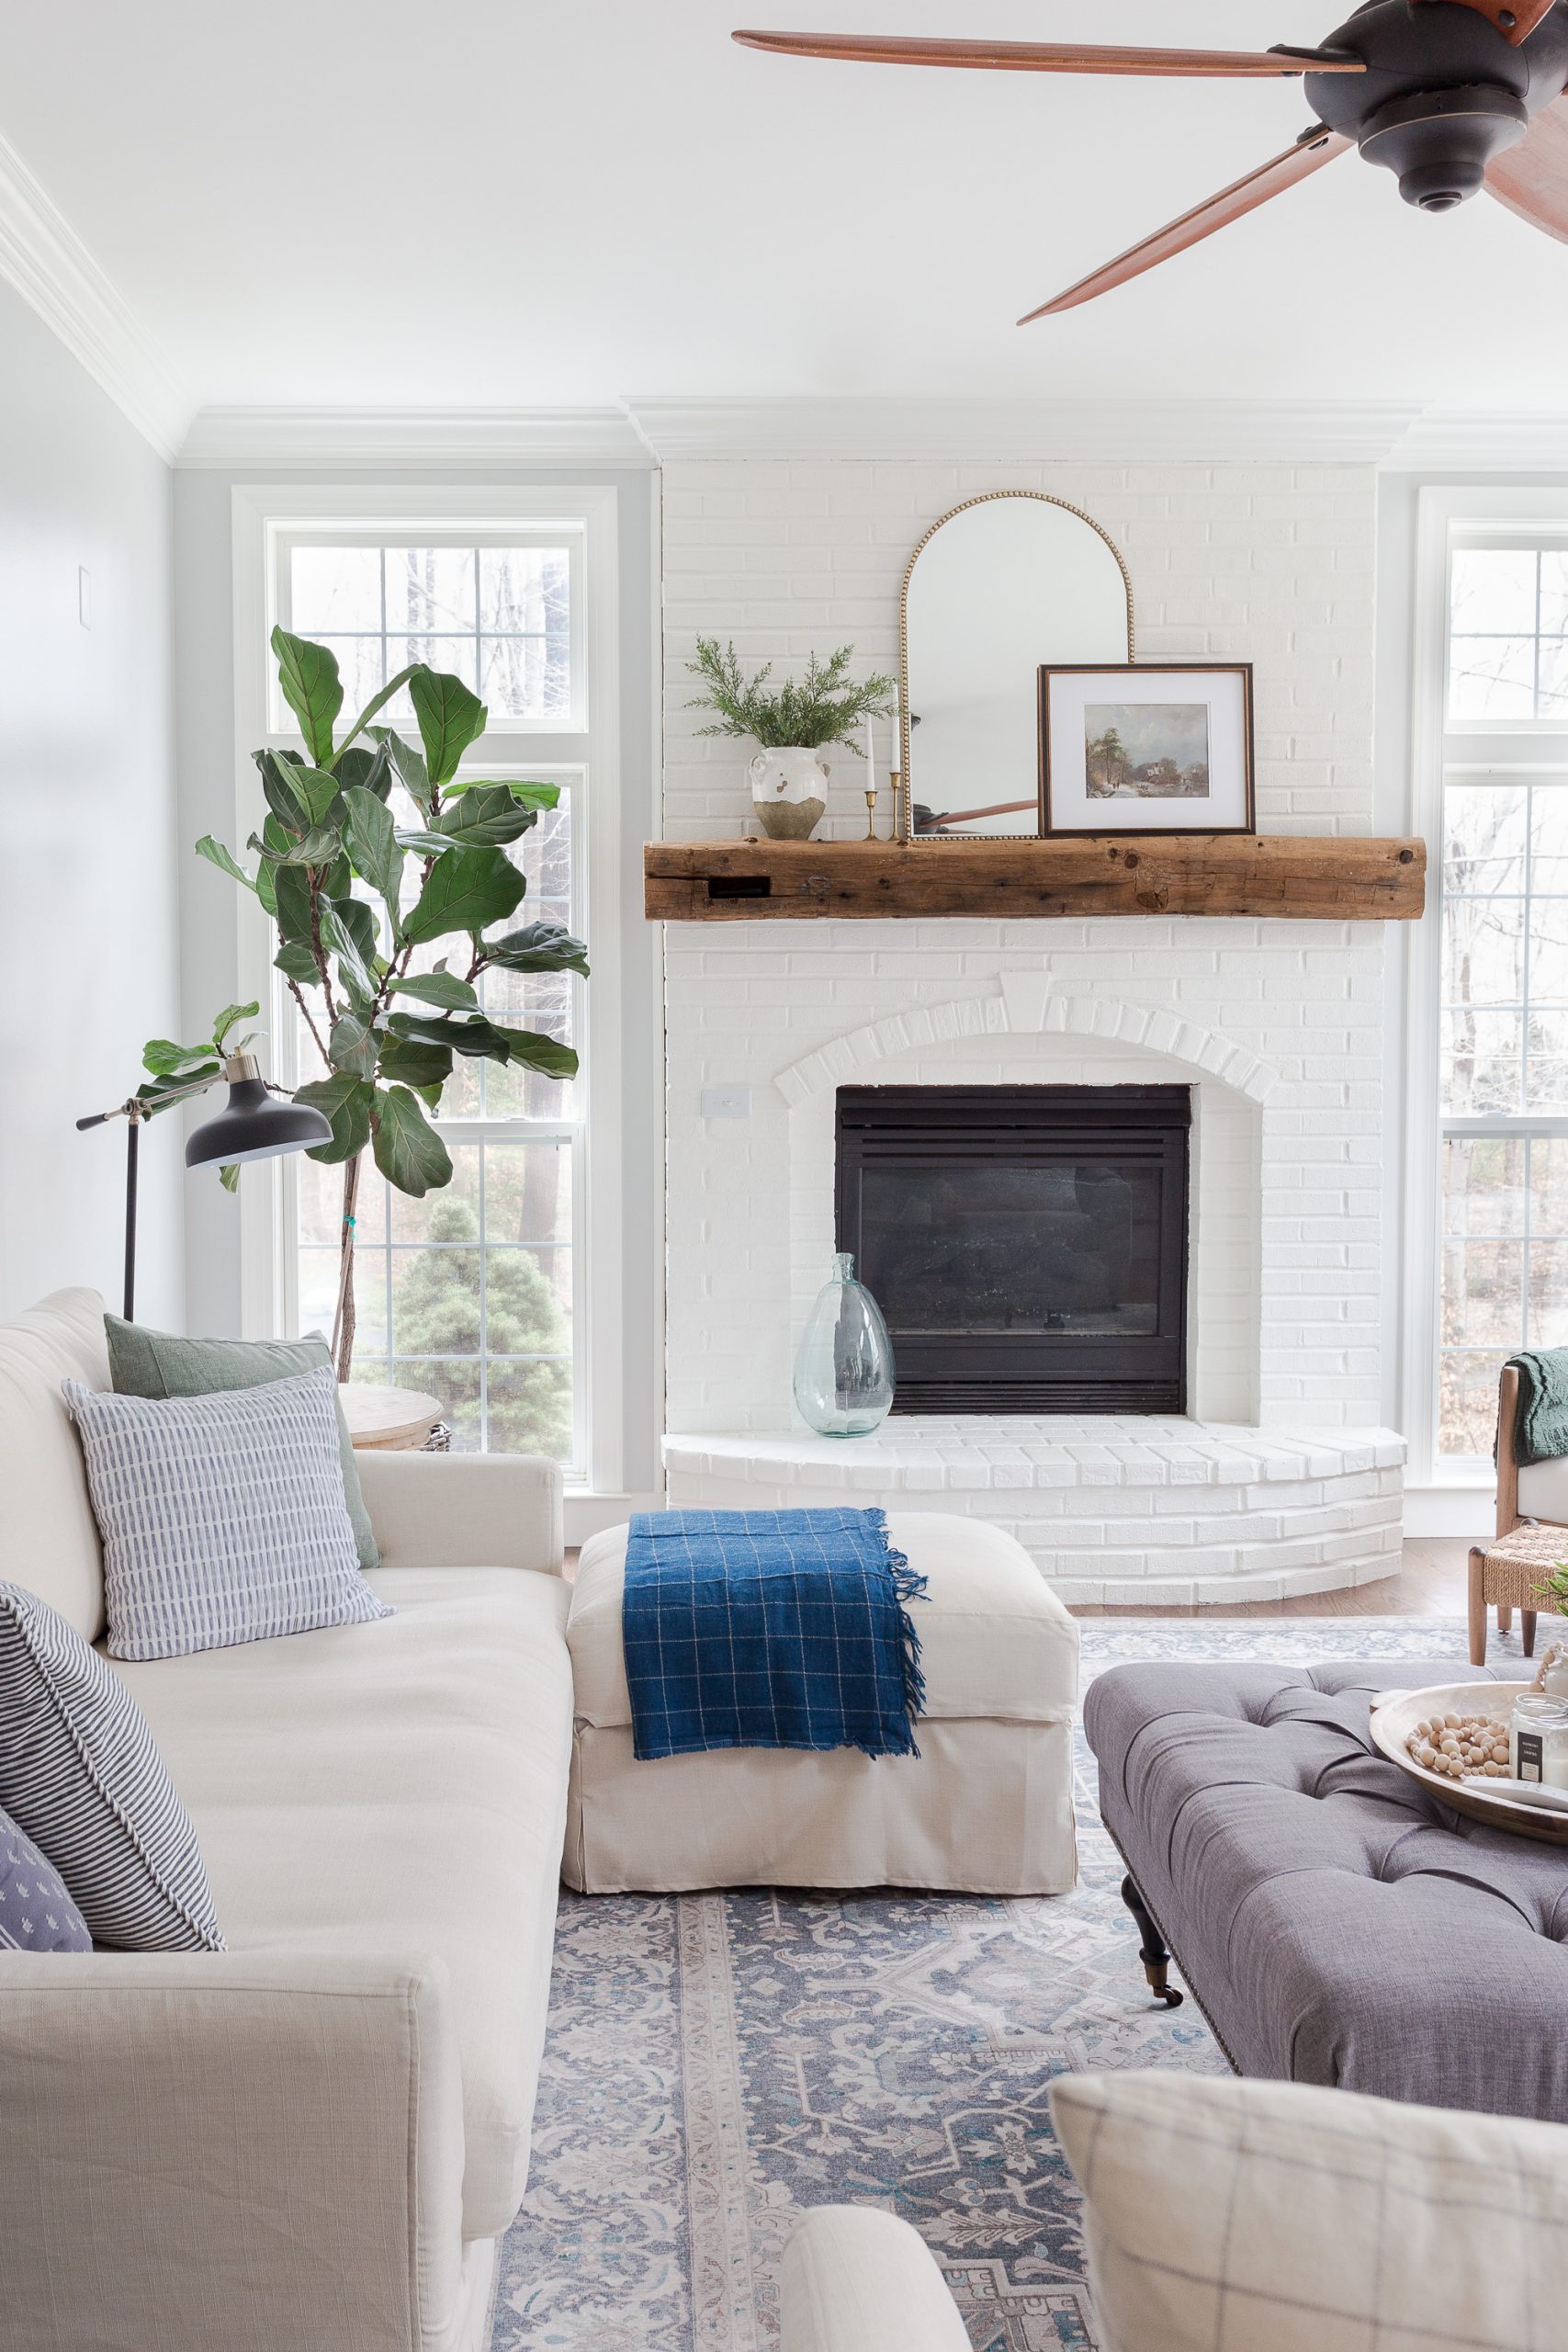 family room with painted white brick fireplace with fiddle leaf tree next to window in corner and sofa and gray tufted ottoman